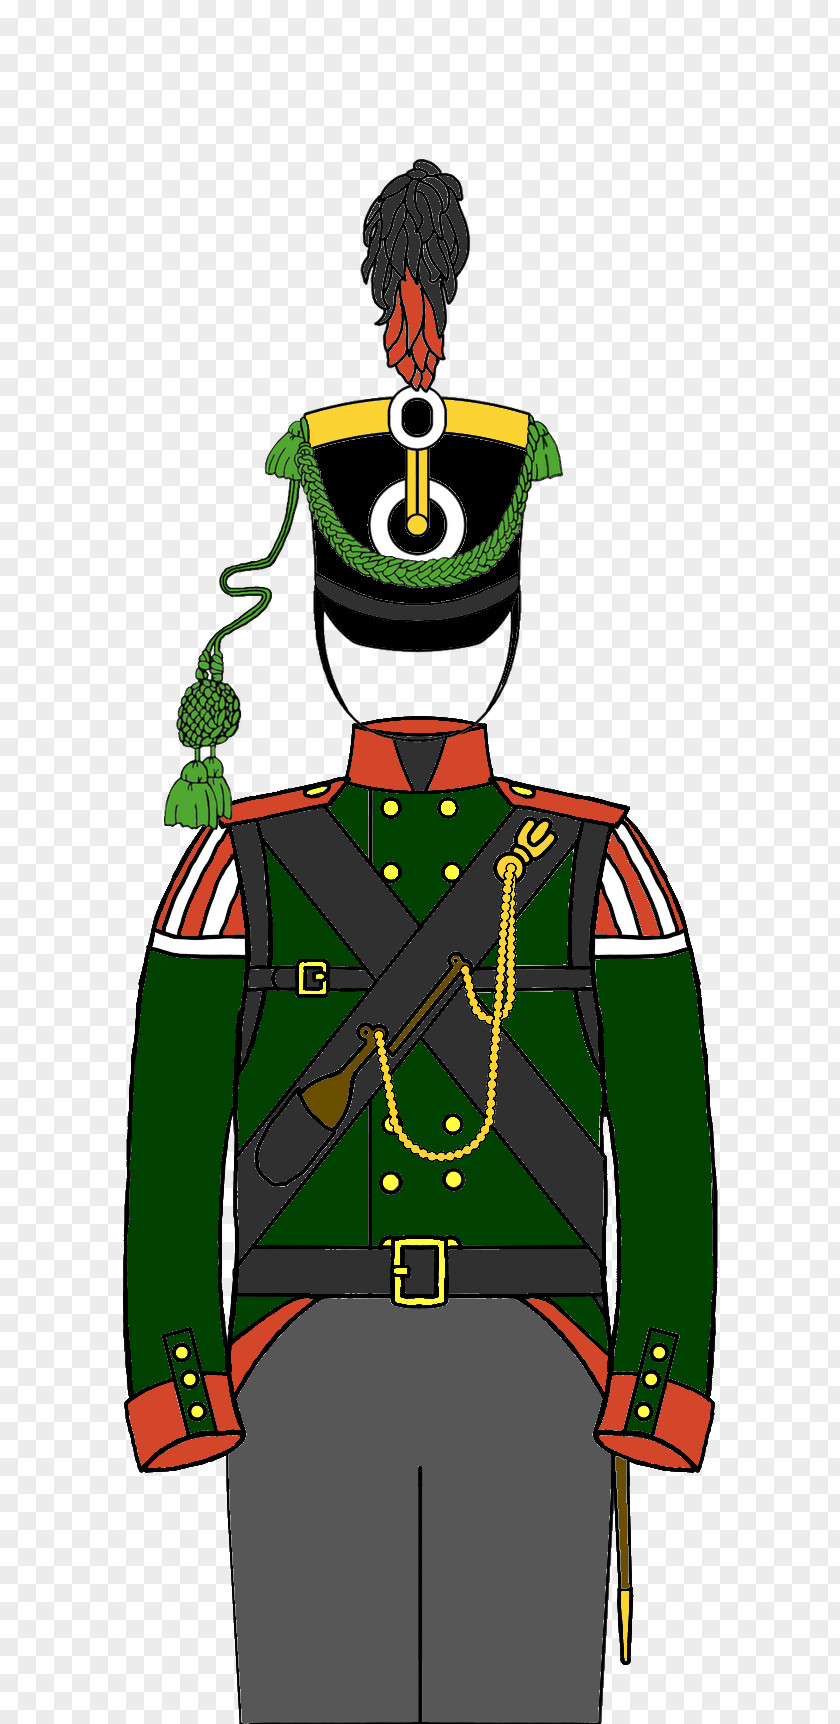 Military Uniforms Rank Illustration Character PNG